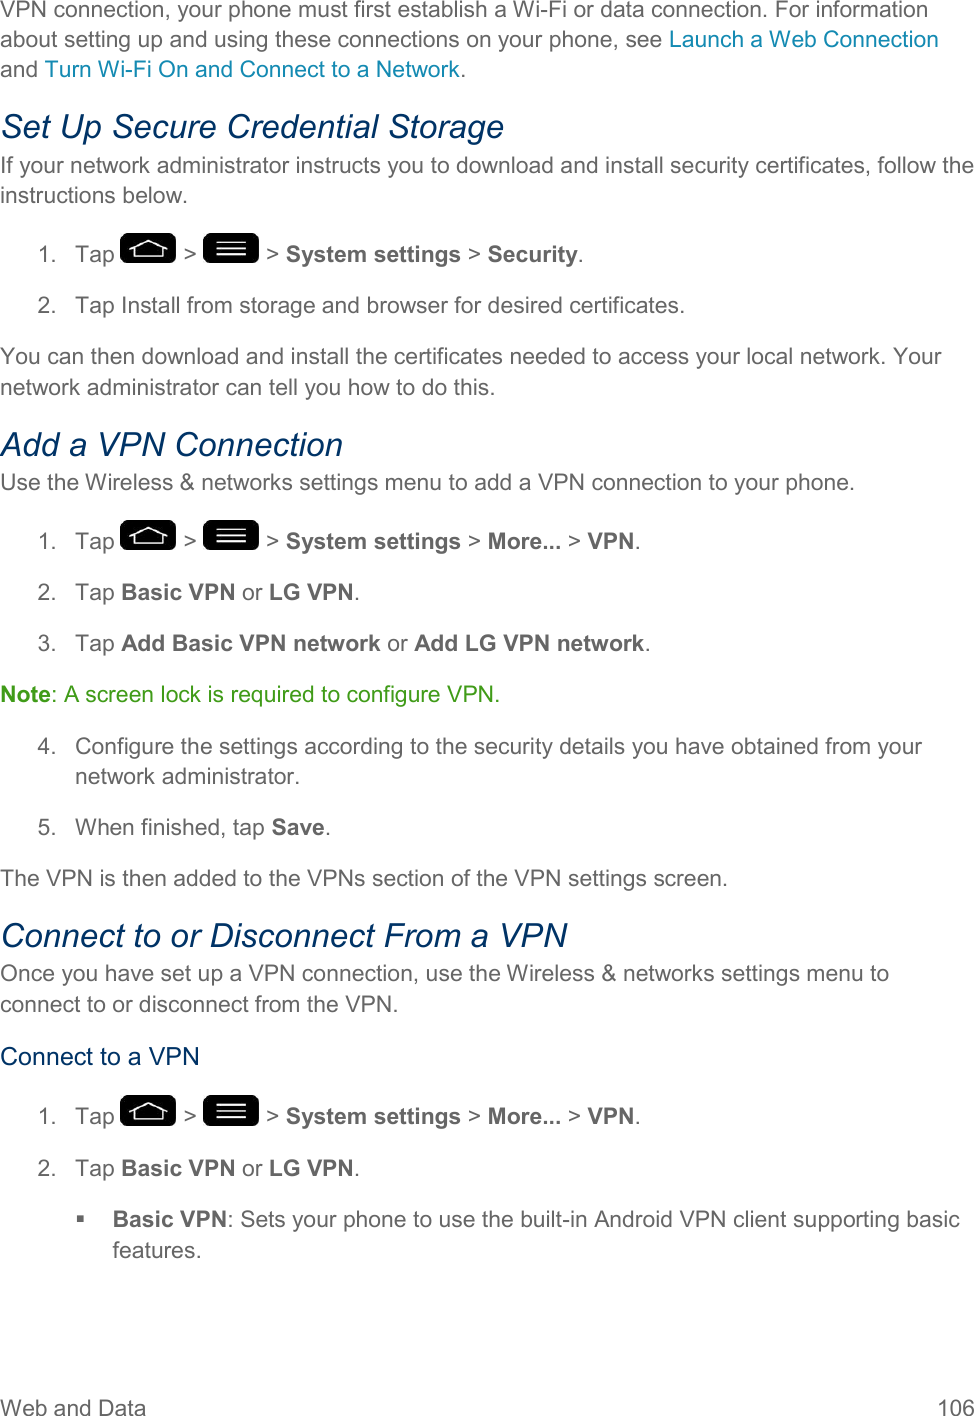 Web and Data  106 VPN connection, your phone must first establish a Wi-Fi or data connection. For information about setting up and using these connections on your phone, see Launch a Web Connection and Turn Wi-Fi On and Connect to a Network. Set Up Secure Credential Storage If your network administrator instructs you to download and install security certificates, follow the instructions below. 1.  Tap   &gt;   &gt; System settings &gt; Security. 2.  Tap Install from storage and browser for desired certificates. You can then download and install the certificates needed to access your local network. Your network administrator can tell you how to do this. Add a VPN Connection Use the Wireless &amp; networks settings menu to add a VPN connection to your phone. 1.  Tap   &gt;   &gt; System settings &gt; More... &gt; VPN. 2.  Tap Basic VPN or LG VPN.  3.  Tap Add Basic VPN network or Add LG VPN network. Note: A screen lock is required to configure VPN. 4.  Configure the settings according to the security details you have obtained from your network administrator. 5.  When finished, tap Save. The VPN is then added to the VPNs section of the VPN settings screen. Connect to or Disconnect From a VPN Once you have set up a VPN connection, use the Wireless &amp; networks settings menu to connect to or disconnect from the VPN. Connect to a VPN 1.  Tap   &gt;   &gt; System settings &gt; More... &gt; VPN. 2.  Tap Basic VPN or LG VPN.  Basic VPN: Sets your phone to use the built-in Android VPN client supporting basic features. 